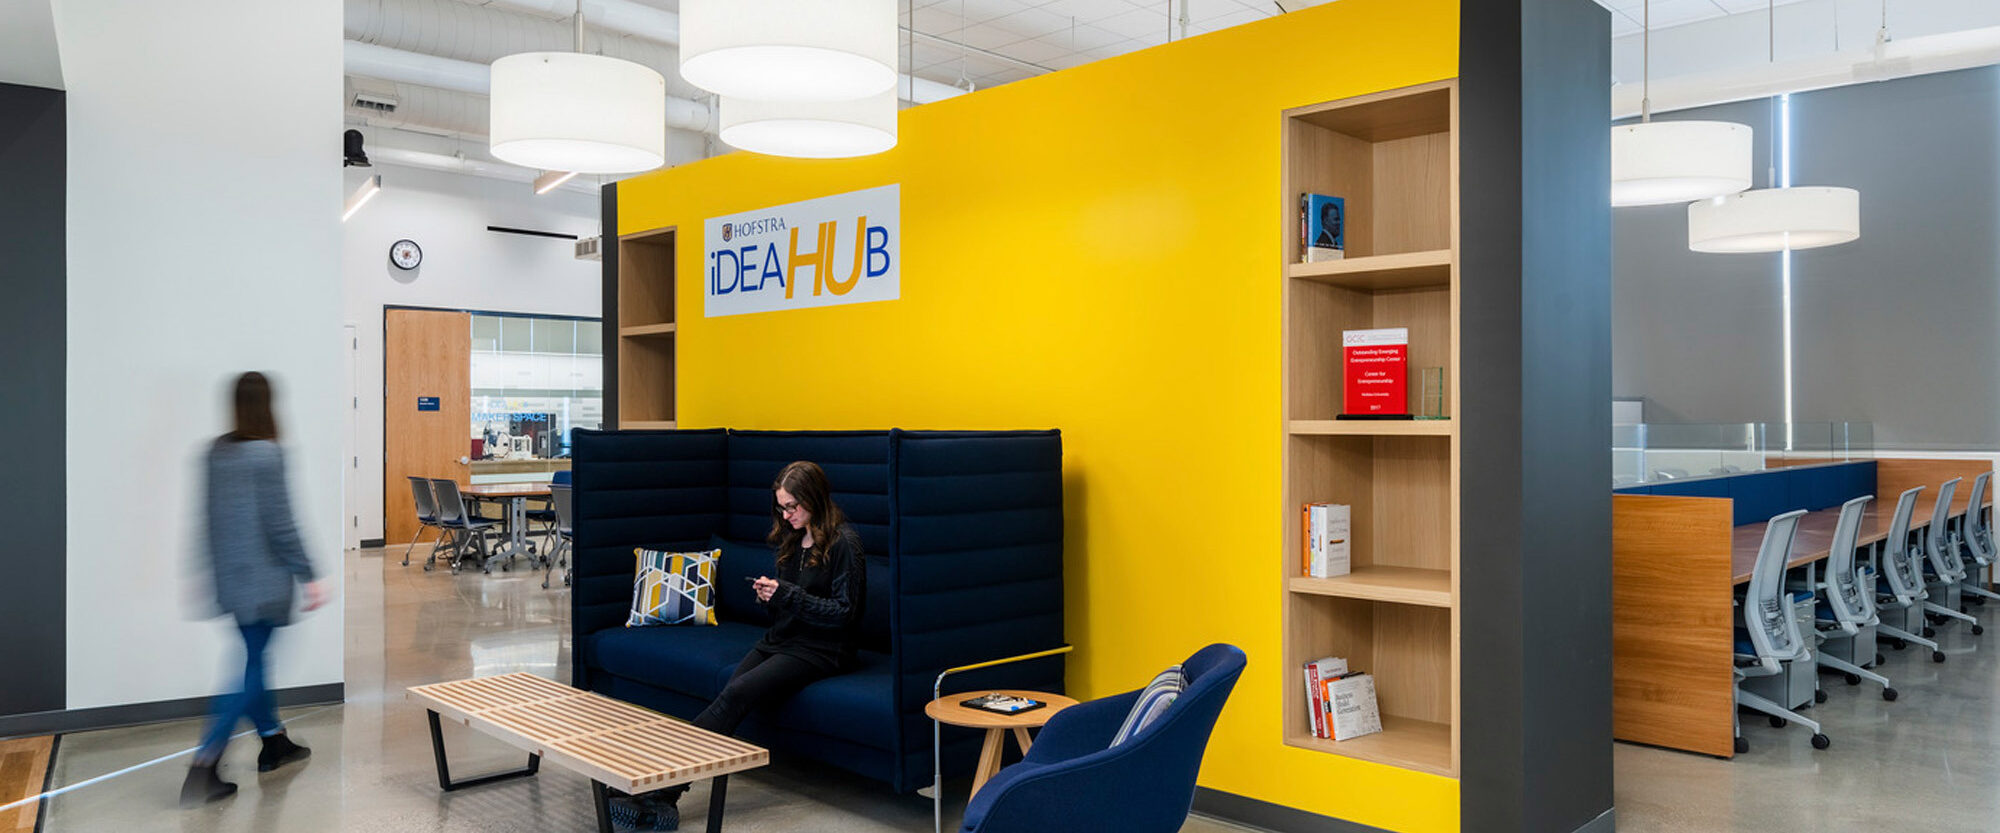 Open office space featuring a vibrant yellow accent wall with the text "IDEA HUB," an adjoining bookshelf, and modern pendant lighting. Individuals engage in work at communal tables, with lounge seating available for informal collaboration.